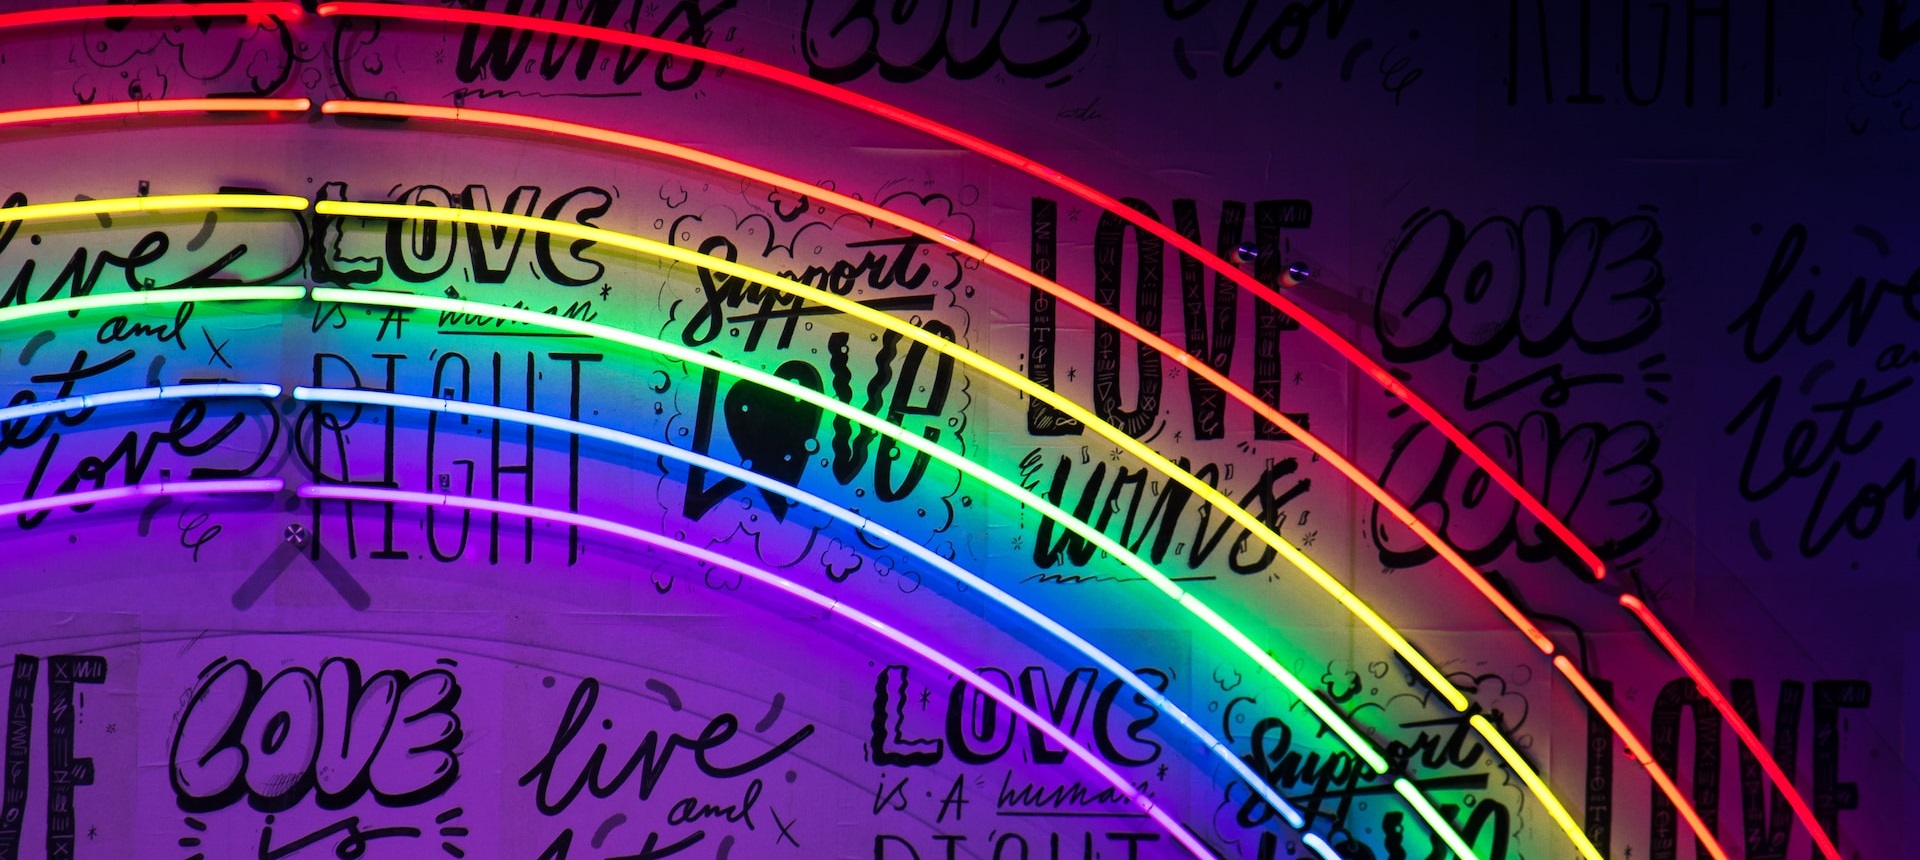 Neon rainbow with love messages for Pride Month. Photo by Jason Leung on Unsplash